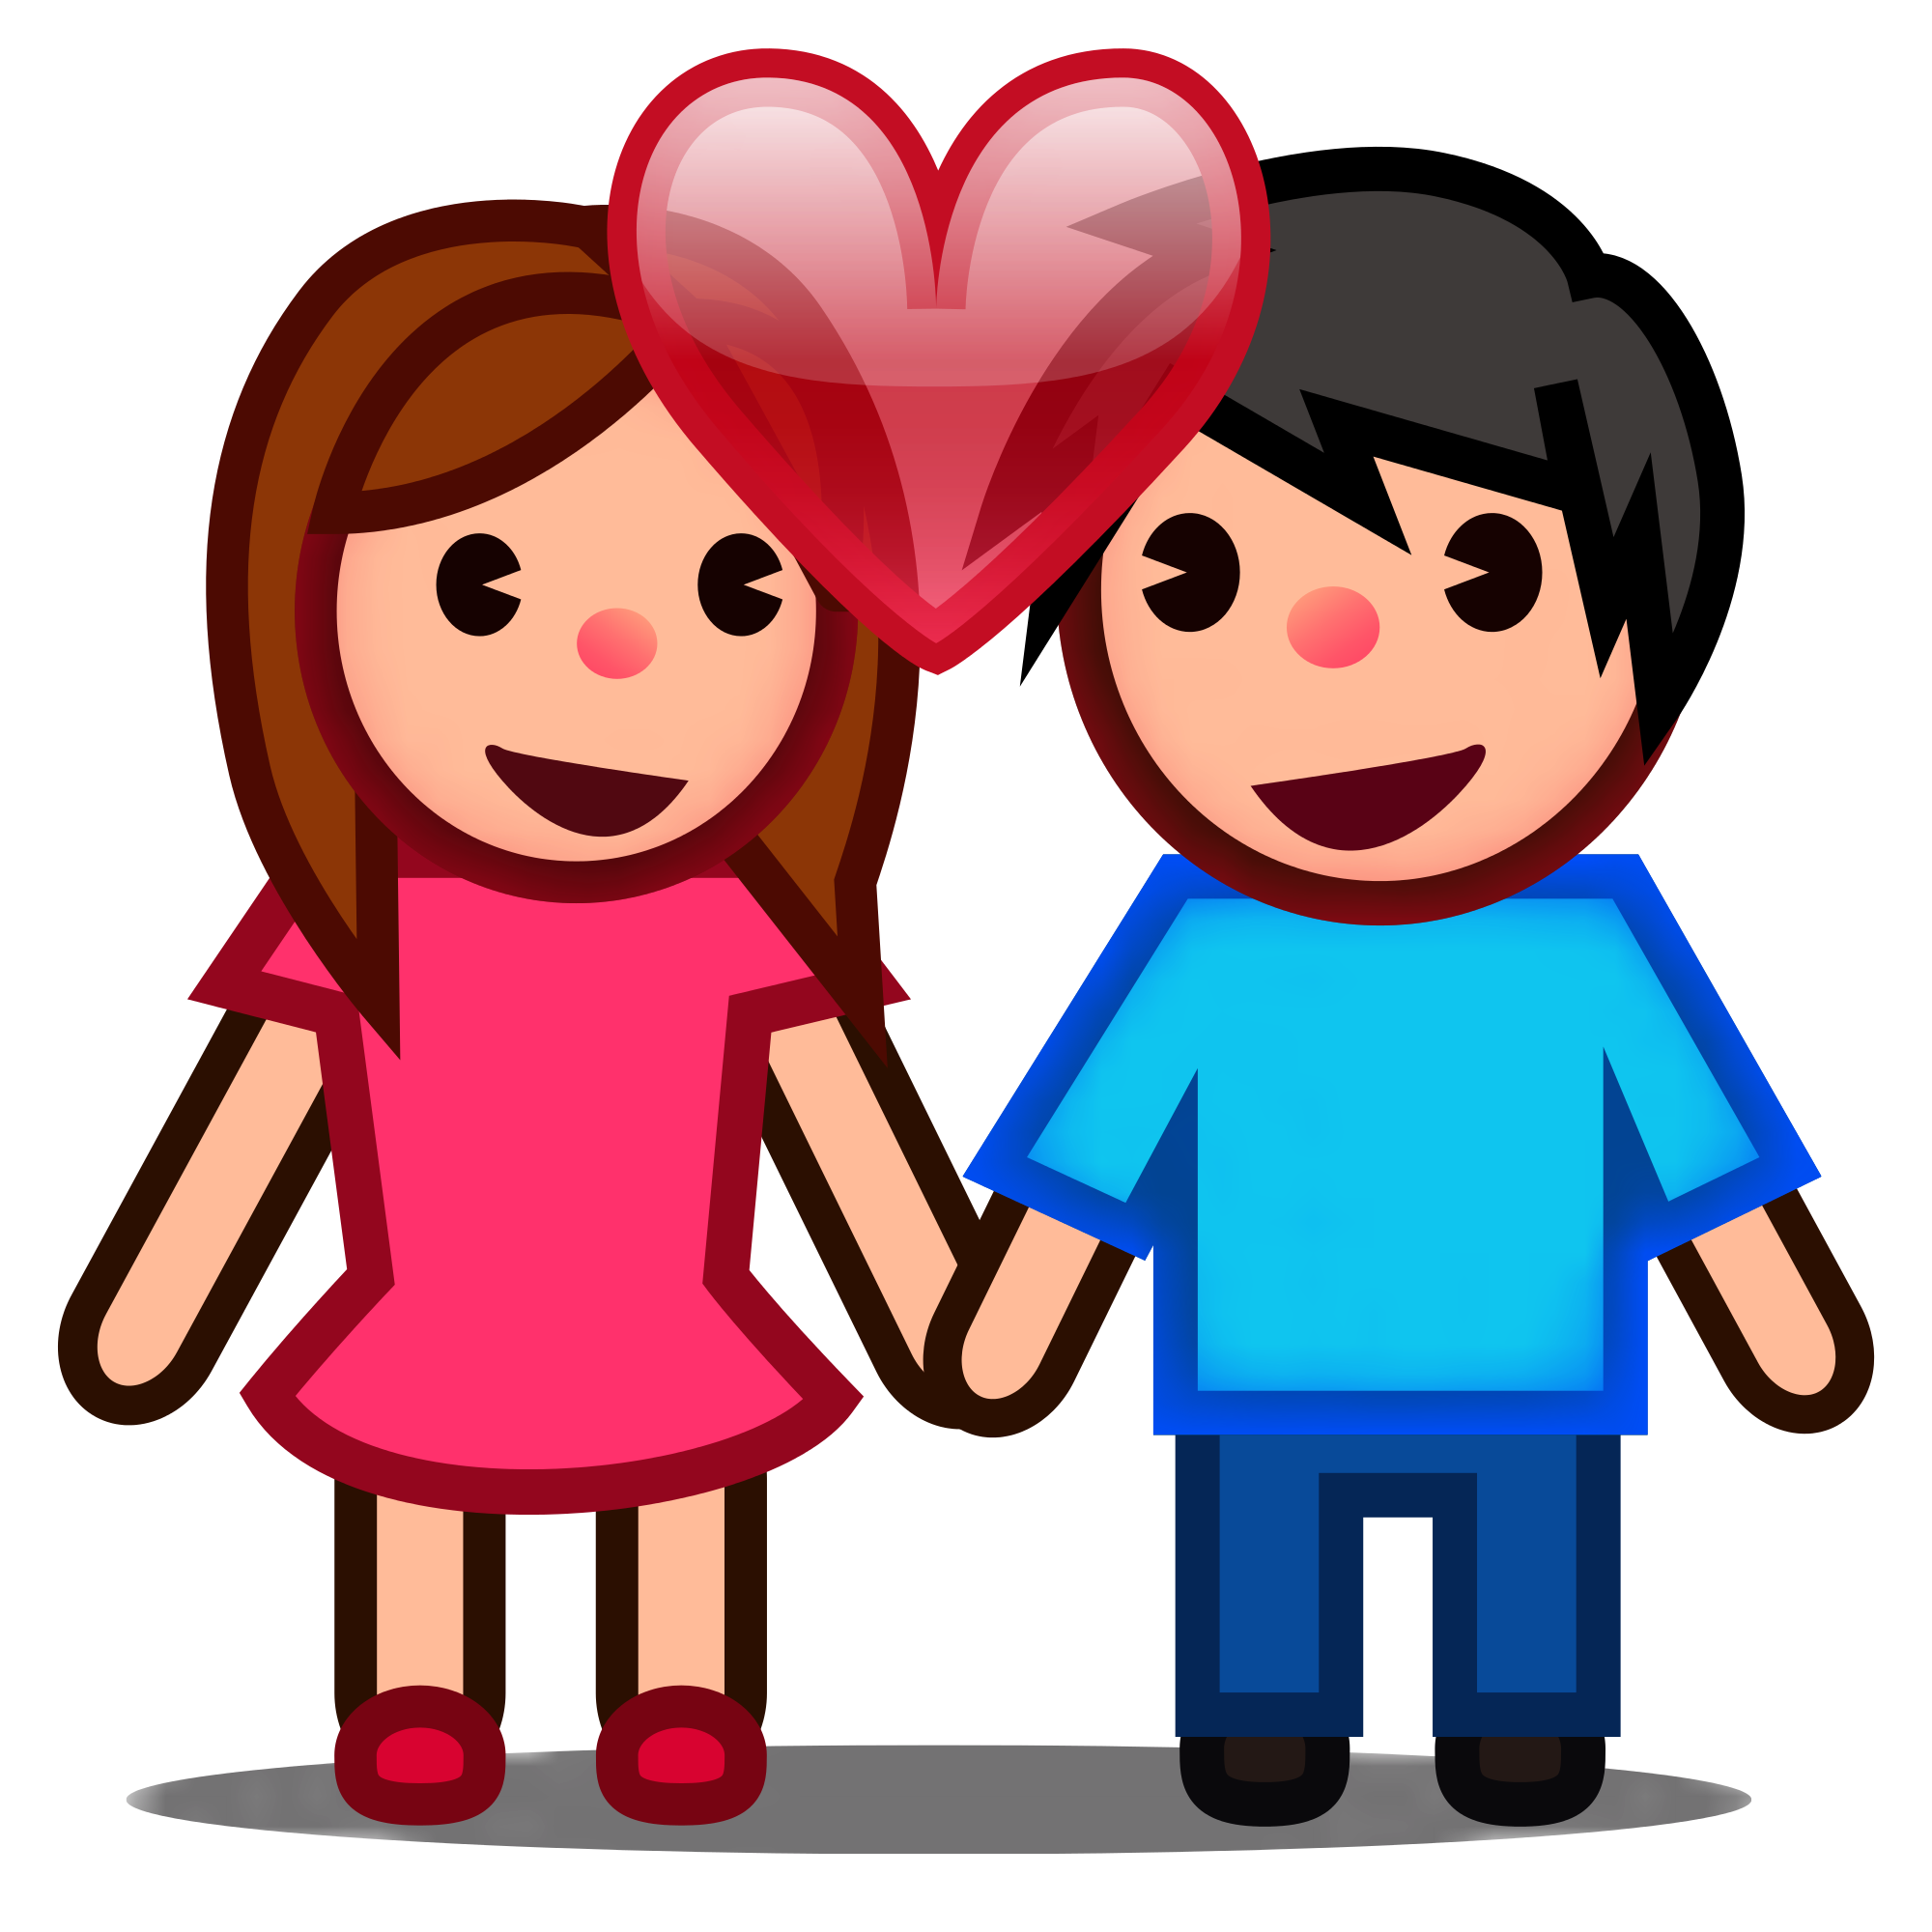 Love Couple Cartoon Image | Free download on ClipArtMag